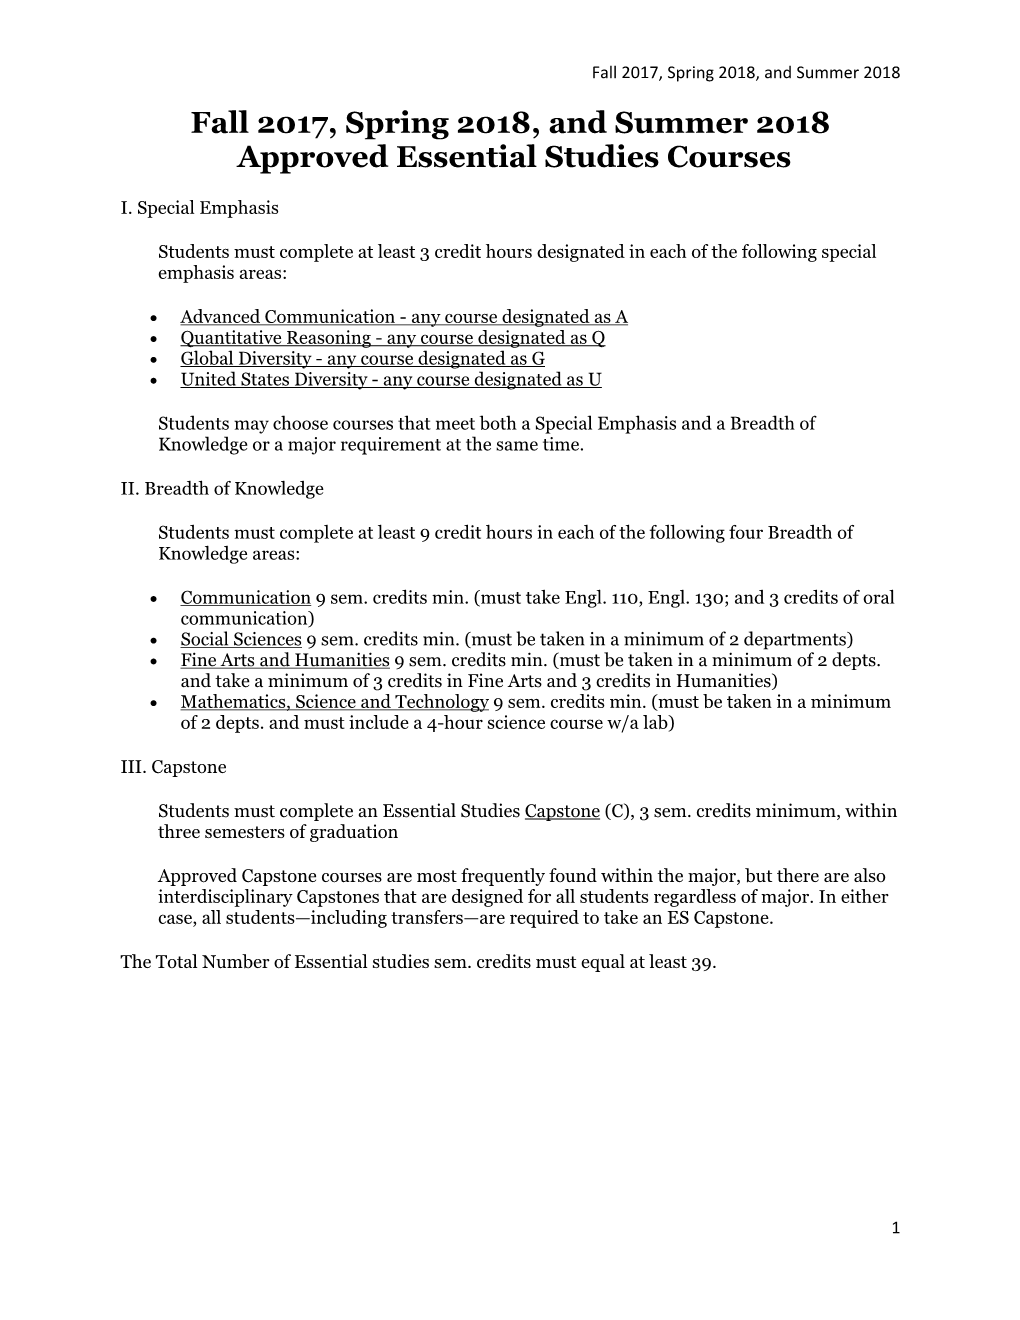 Fall 2017, Spring 2018, and Summer 2018 Approved Essential Studies Courses